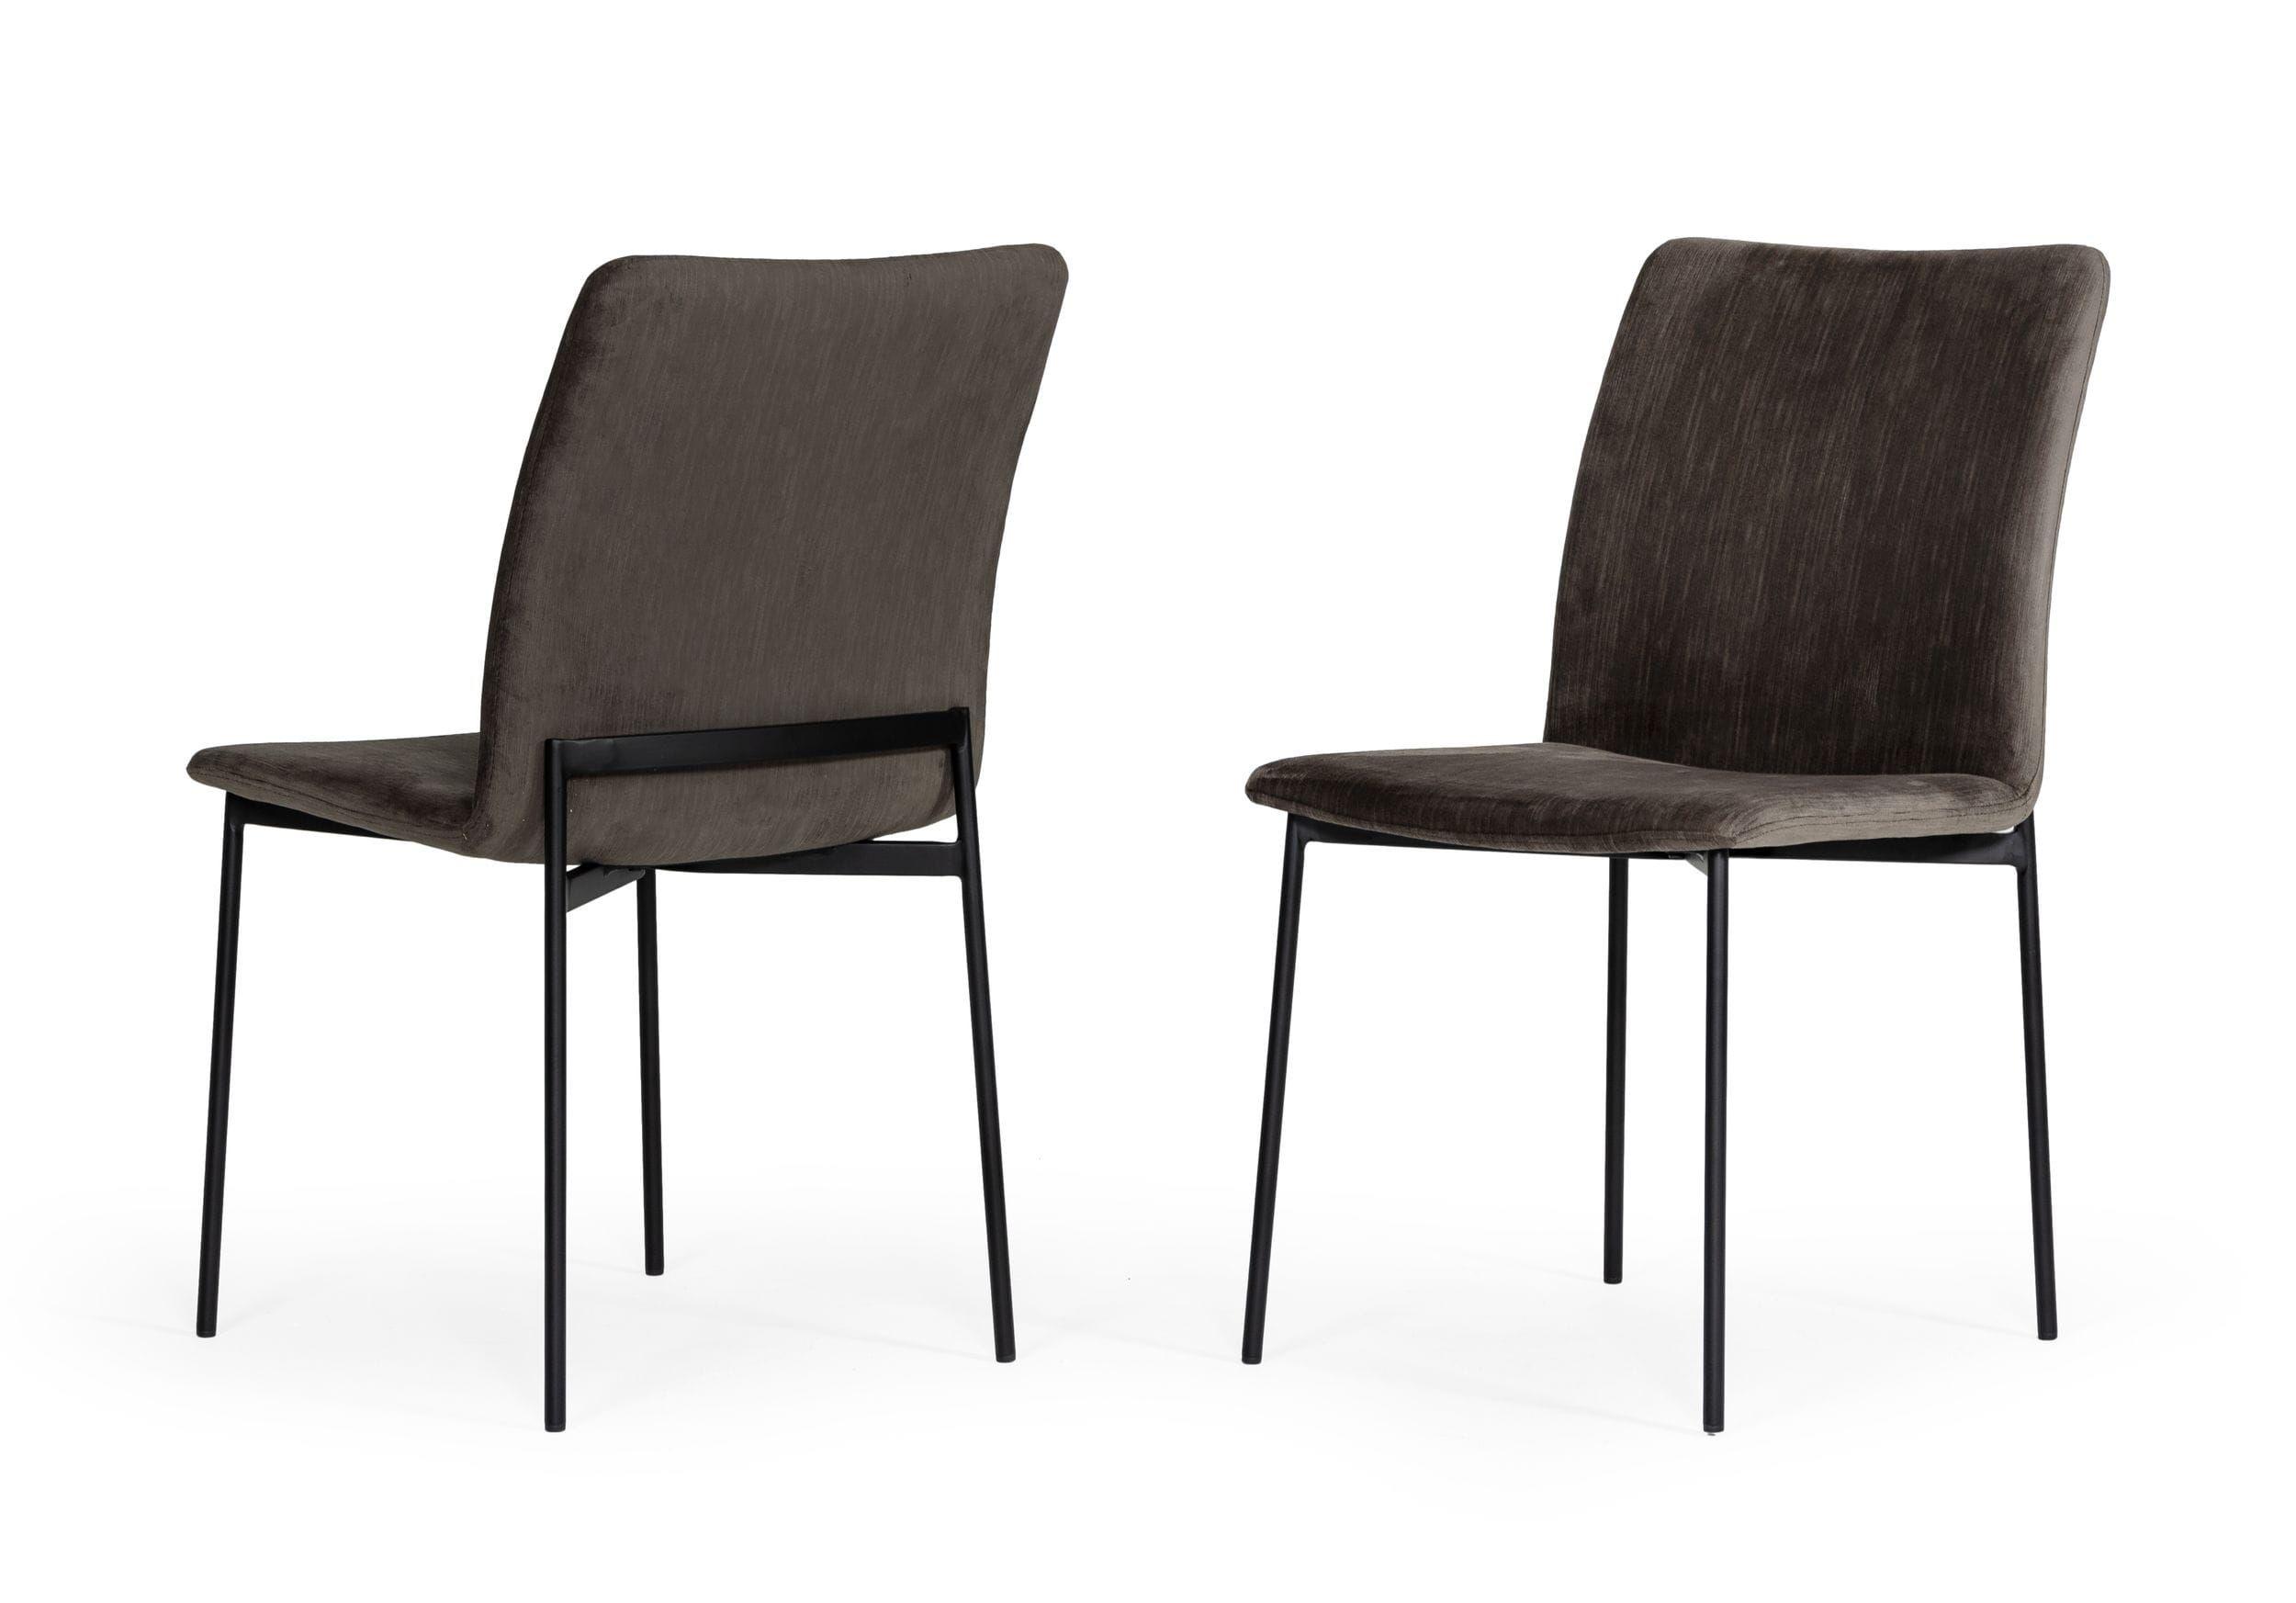 Contemporary, Modern Dining Chair Set Maggie VGDWJ10045-2pcs in Walnut, Black Fabric